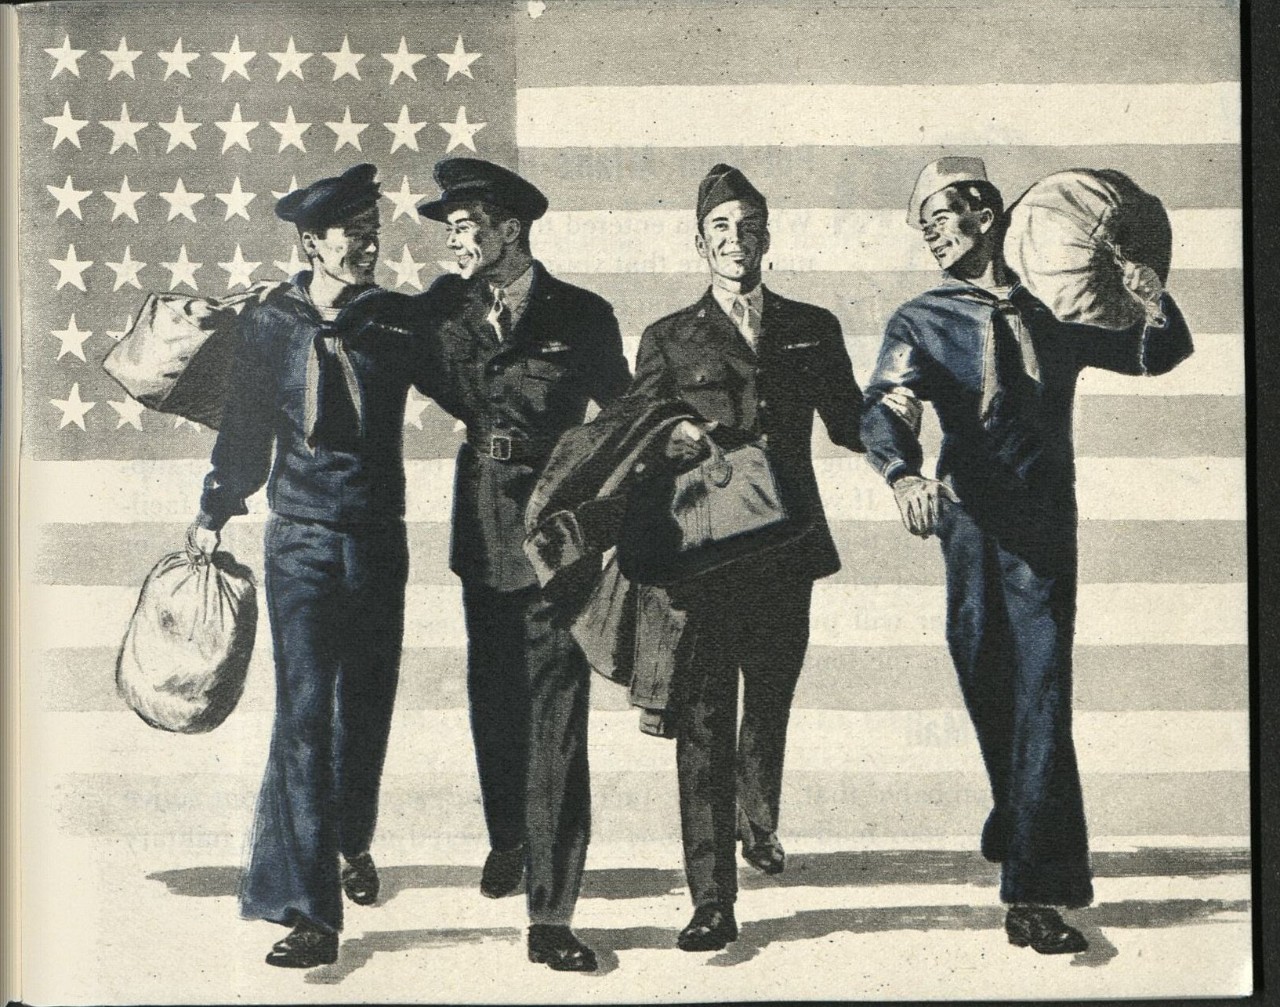 Photo showing four men walking with bags and the American Flag in the background - men representing the Armed Forces returning home at the end of World War II.